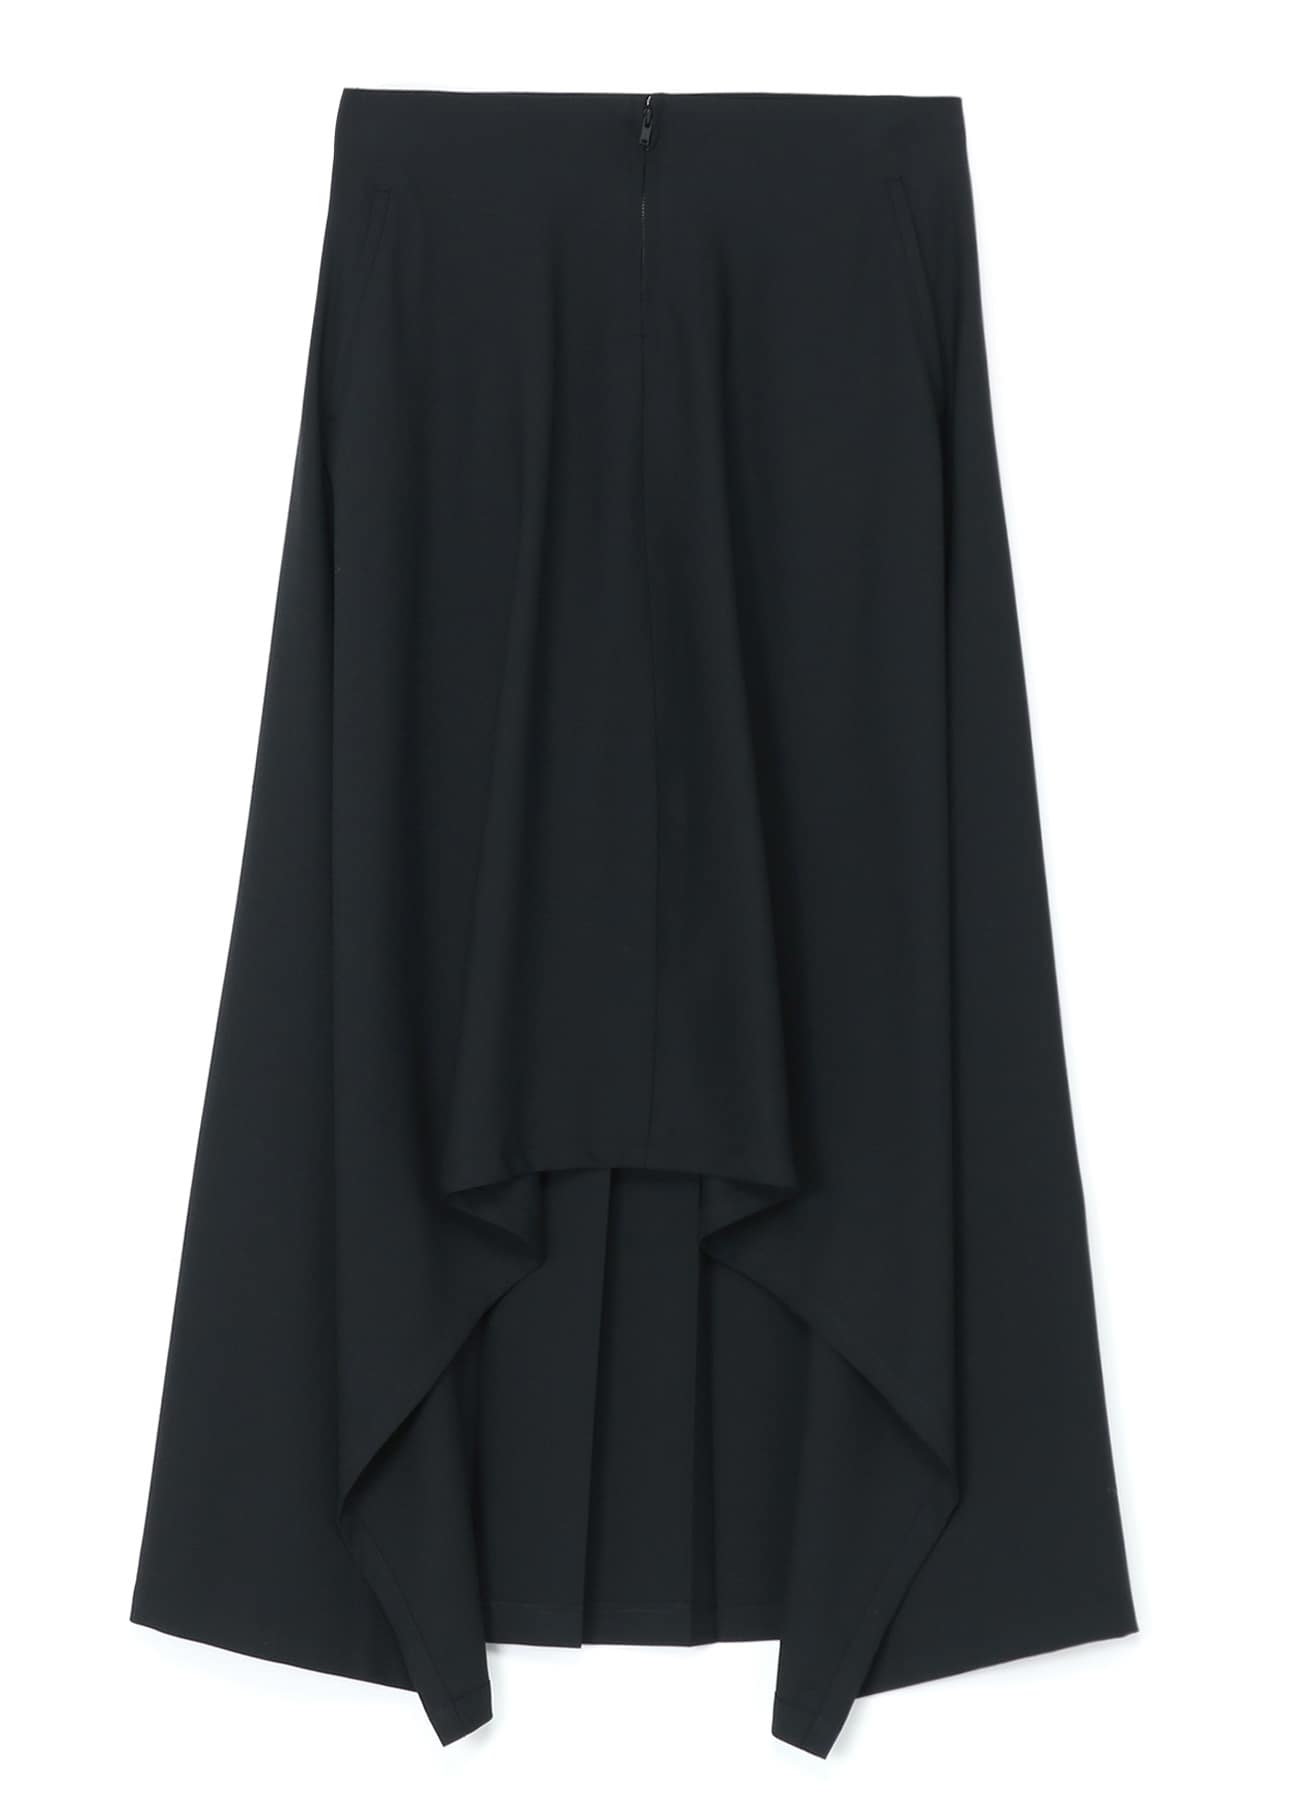 WOOL/POLYESTER SERGE PLEATED SKIRT(S Black): LIMI feu｜THE SHOP